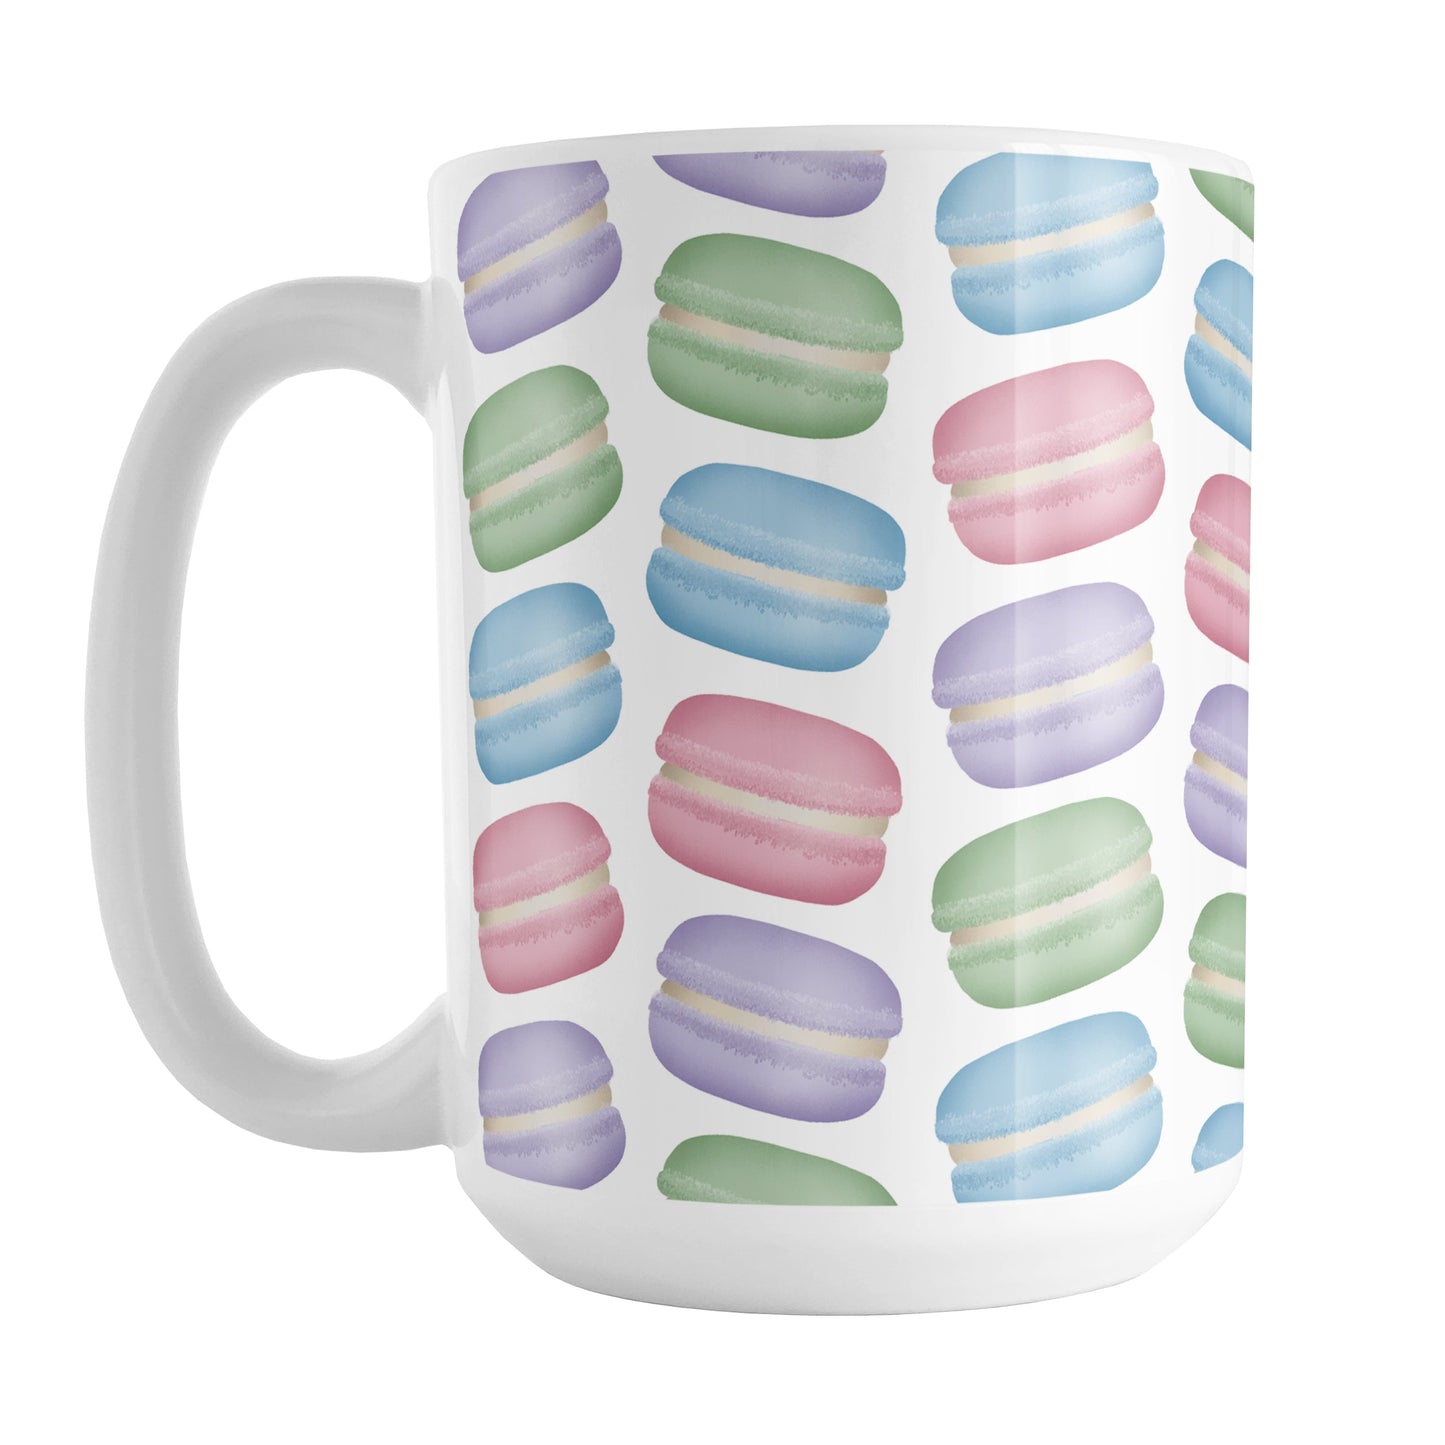 Colorful Pastel Macarons Mug (15oz) at Amy's Coffee Mugs. A ceramic coffee mug designed with colorful pastel macarons colored in pink, purple, green, and blue in a pattern that wraps around the mug to the handle.